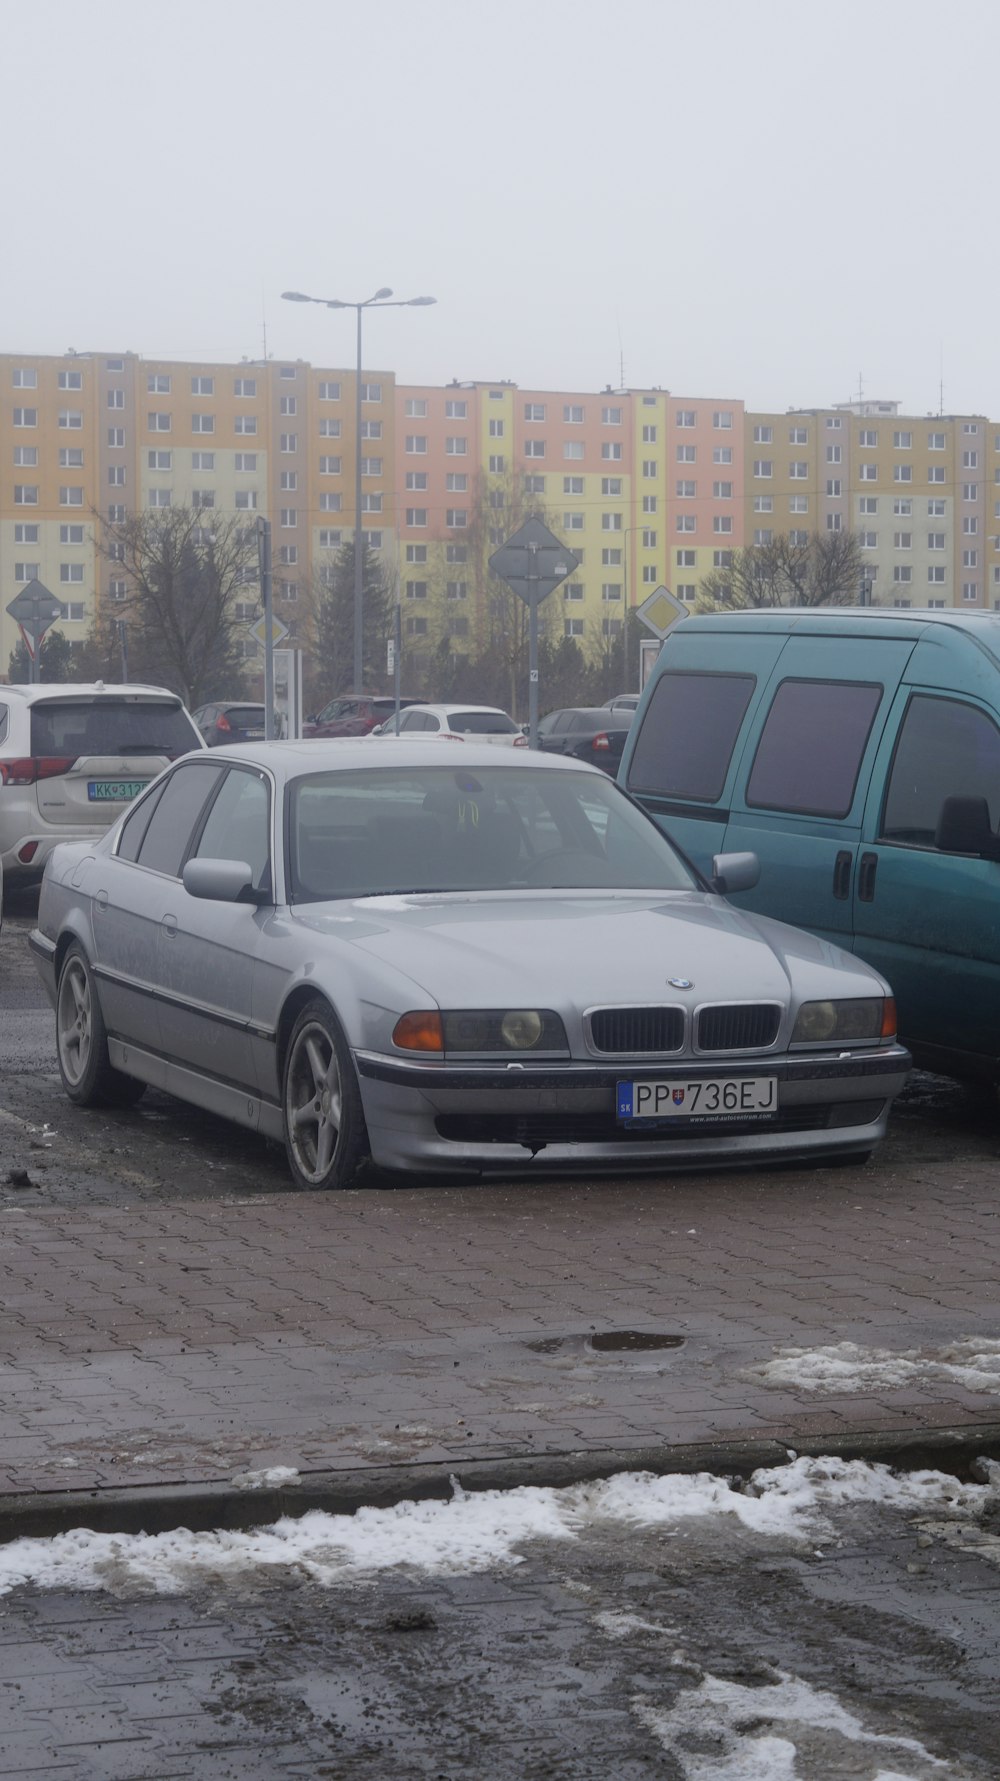 a silver car parked in a parking lot next to other cars